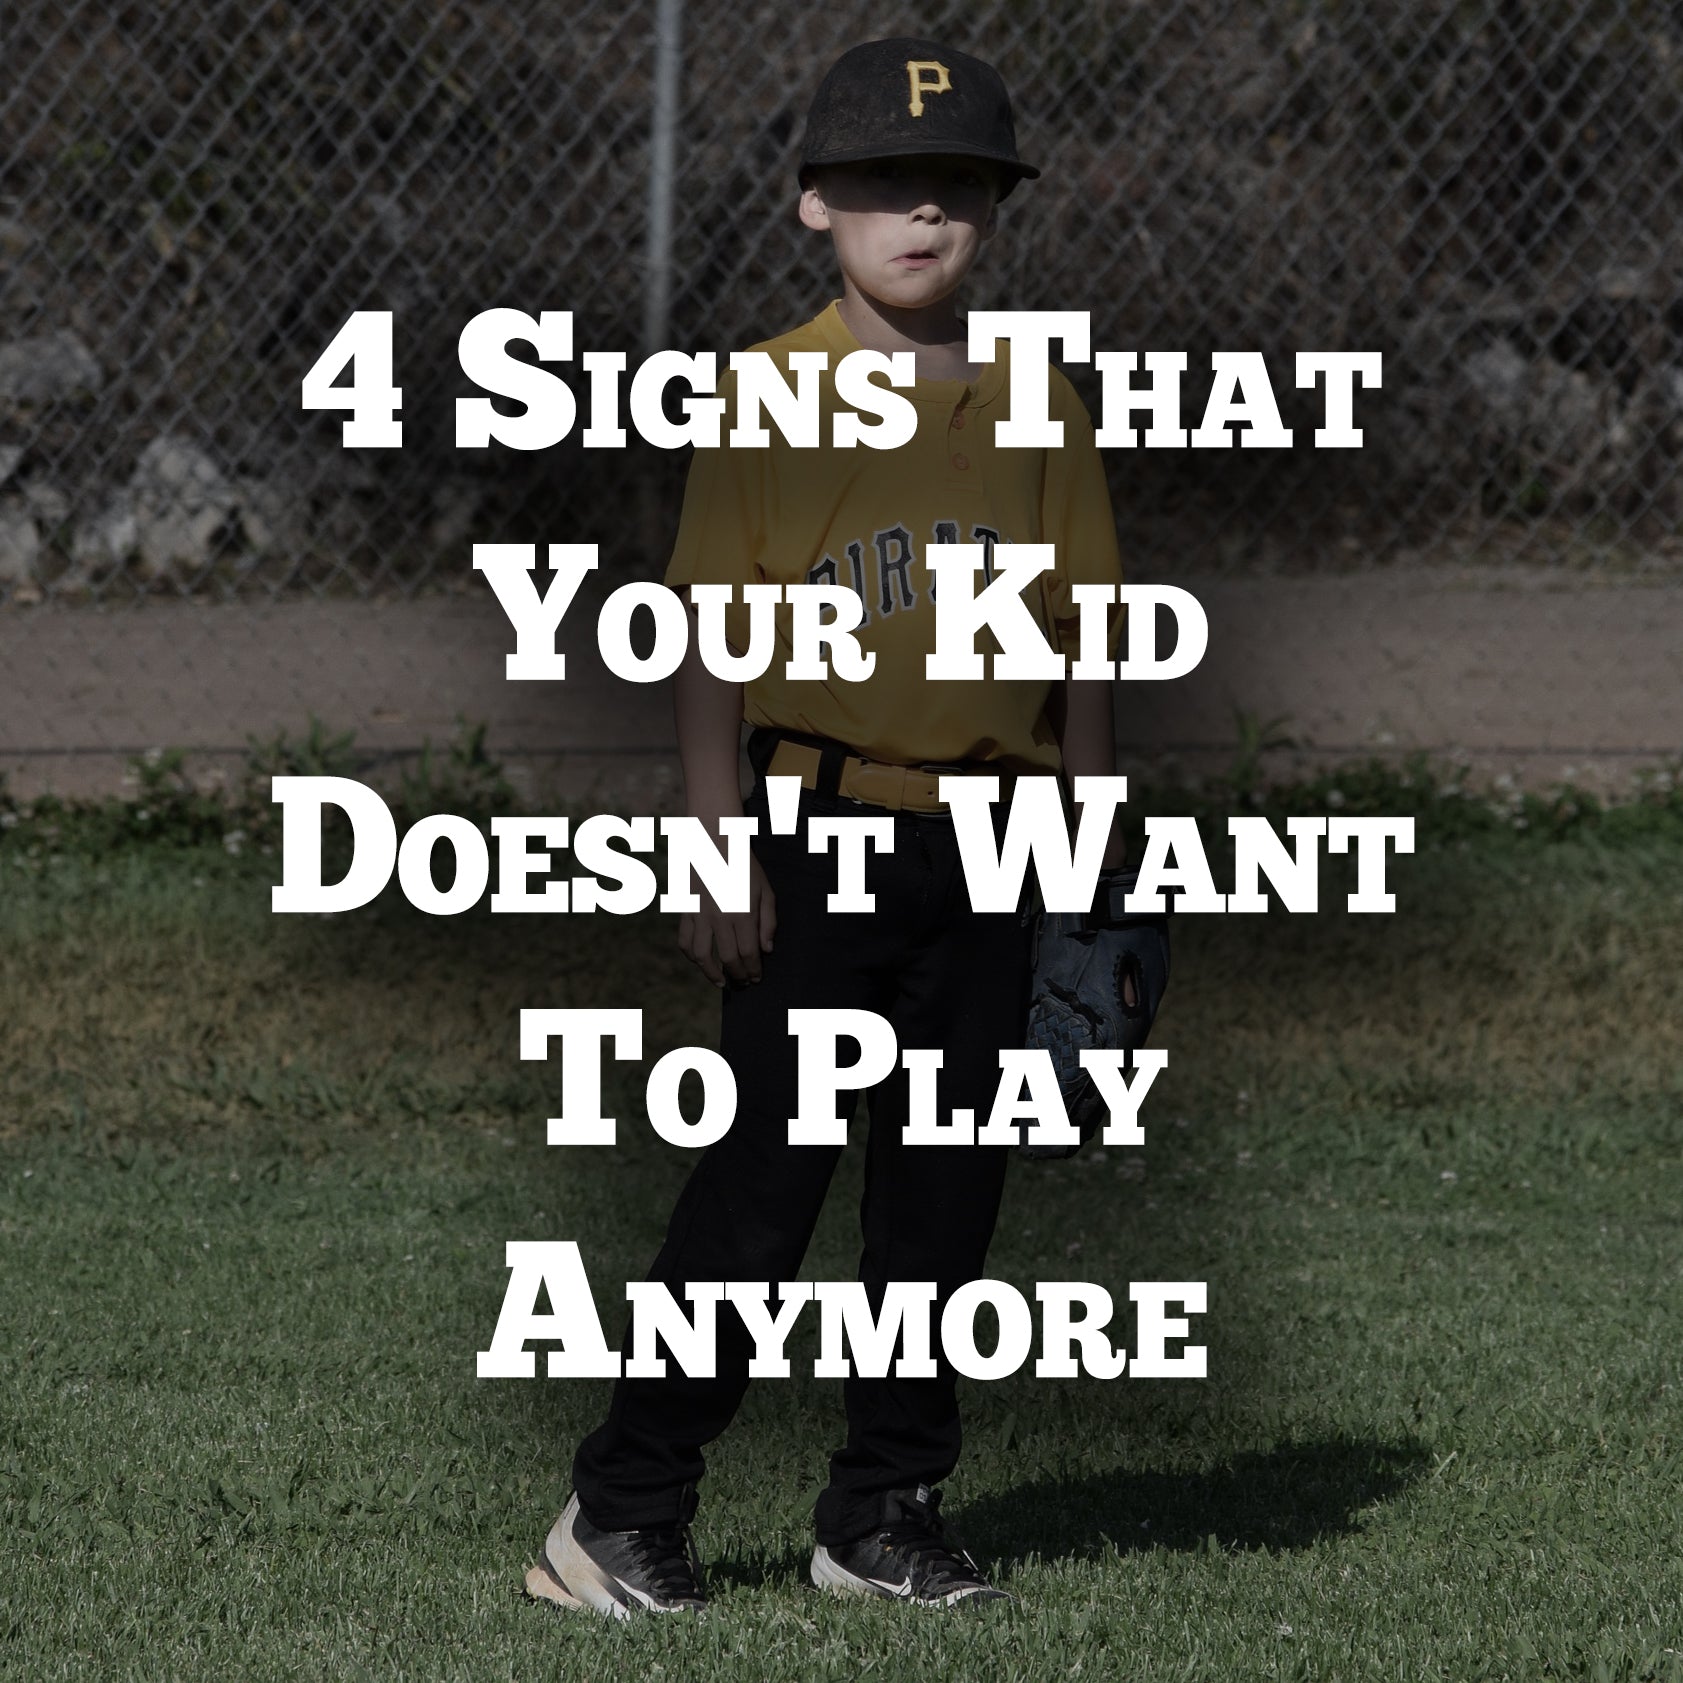 4 Signs Your Kid Doesn't Want to Play Anymore